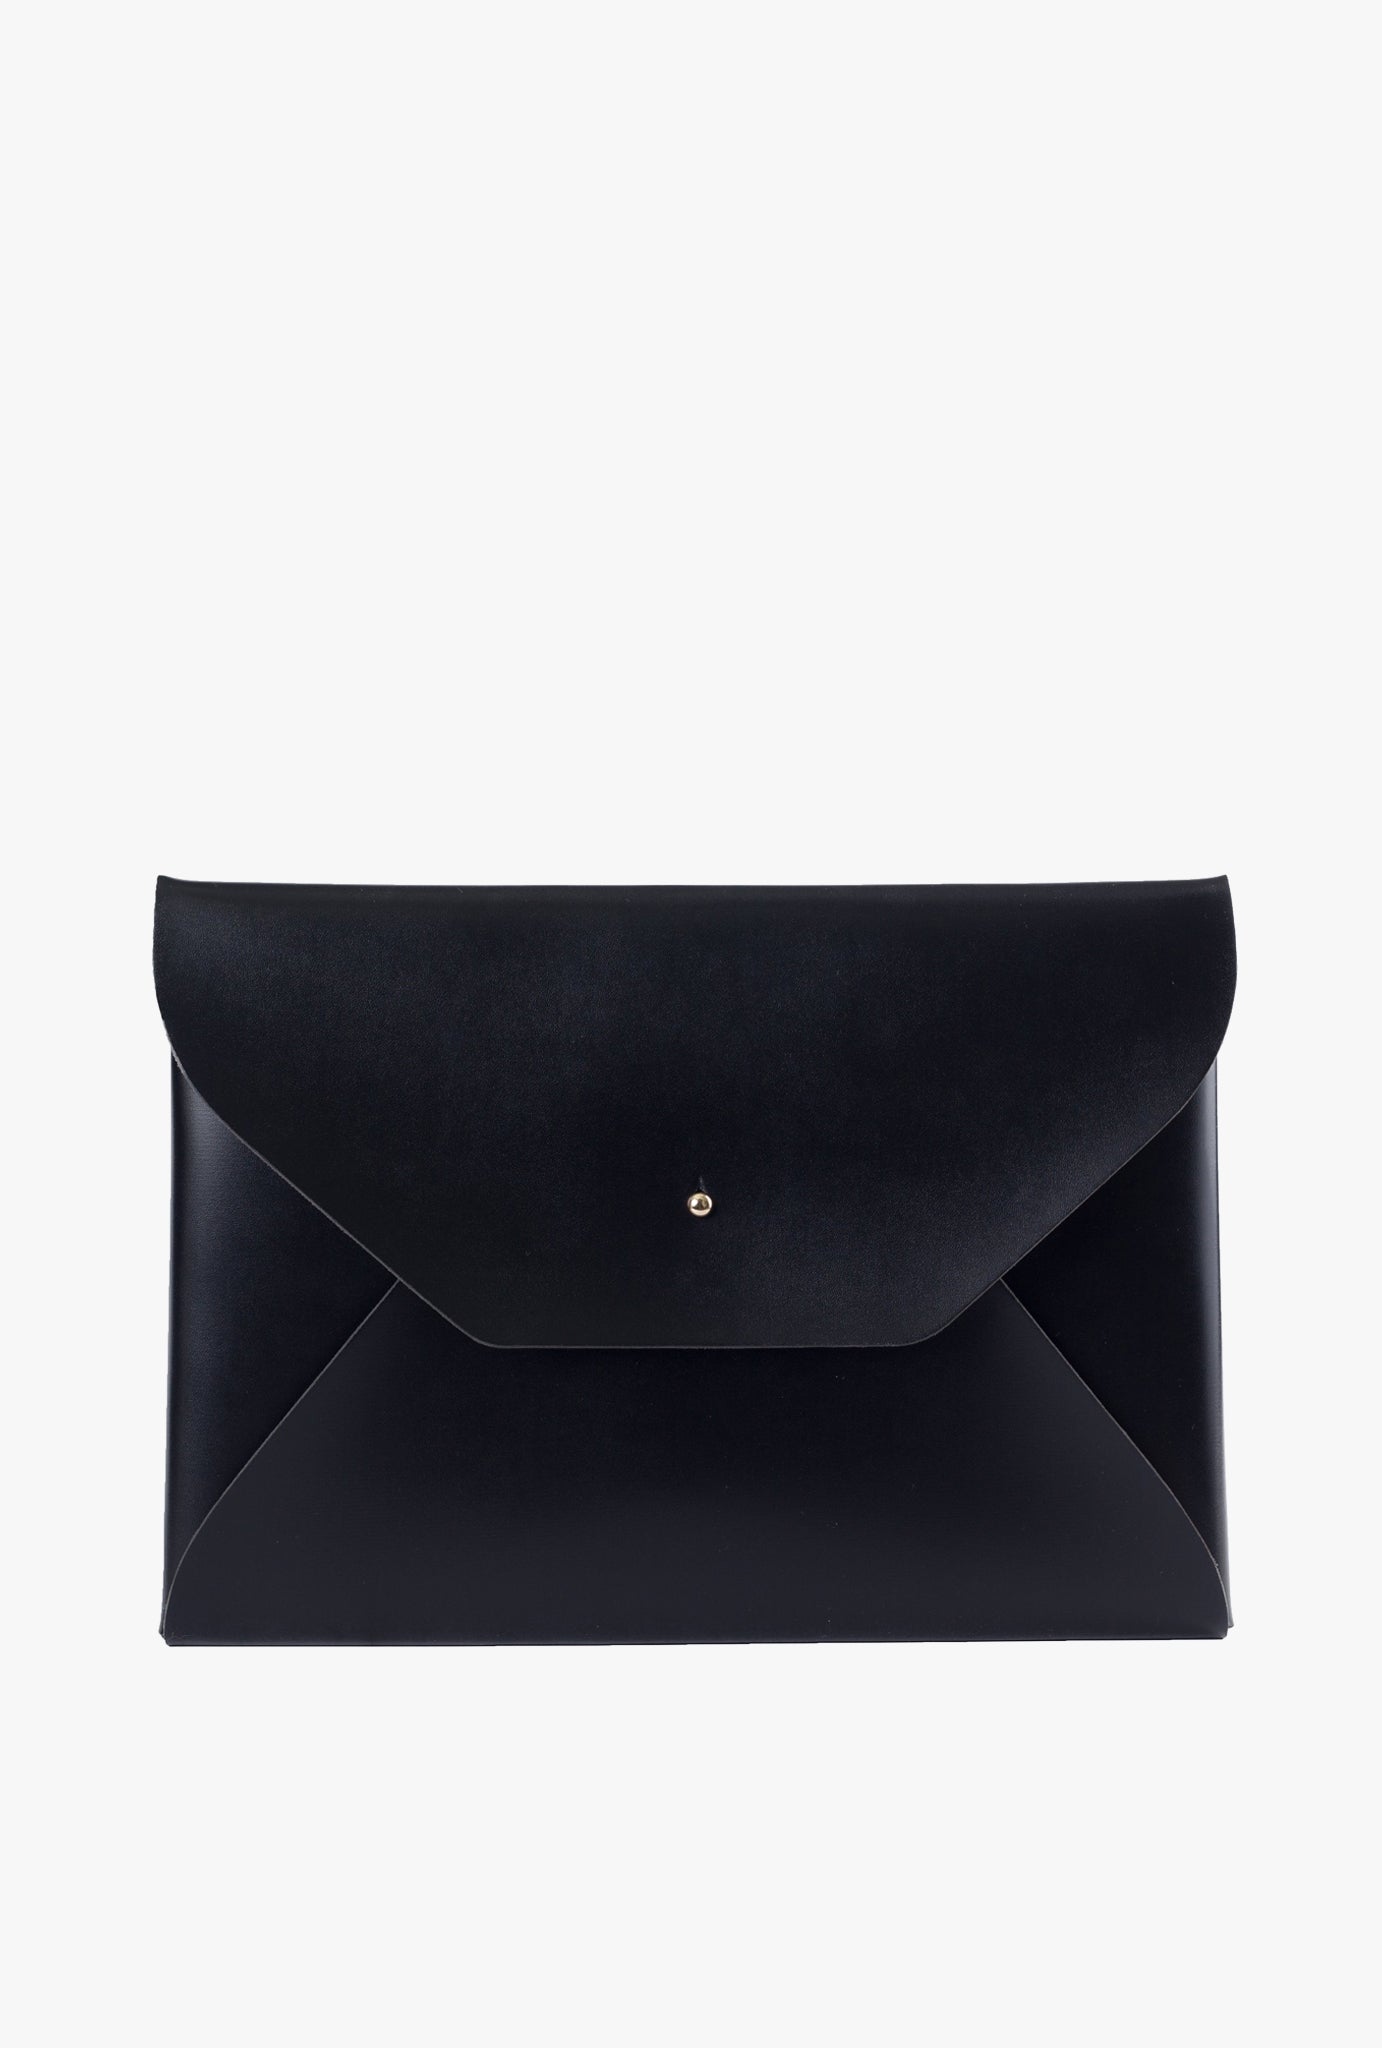 The 15&quot; Laptop Sleeve in Black